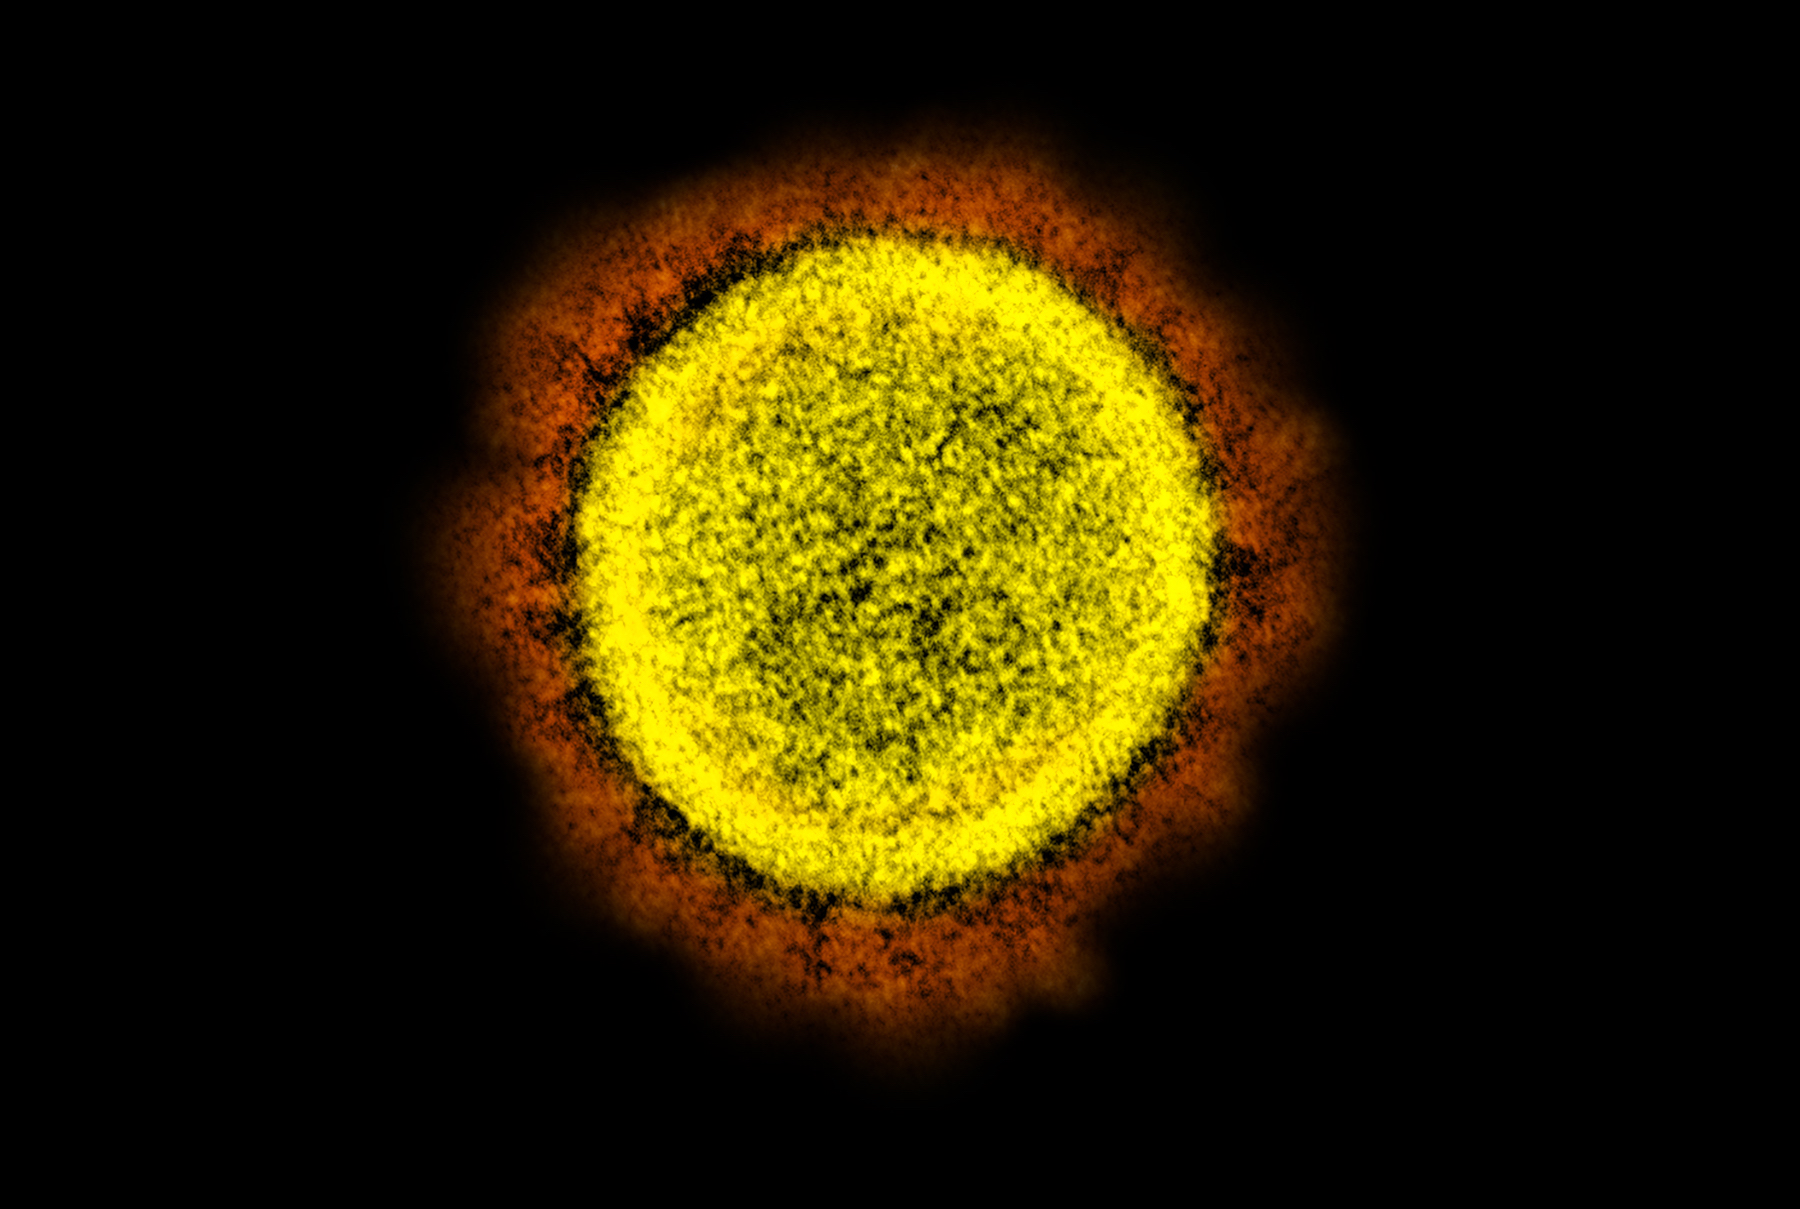 A colored image of SARS-CoV-2, the new coronavirus. The virus's circular envelope is colored yellow, its spike proteins on the outside colored red, all on a black background.